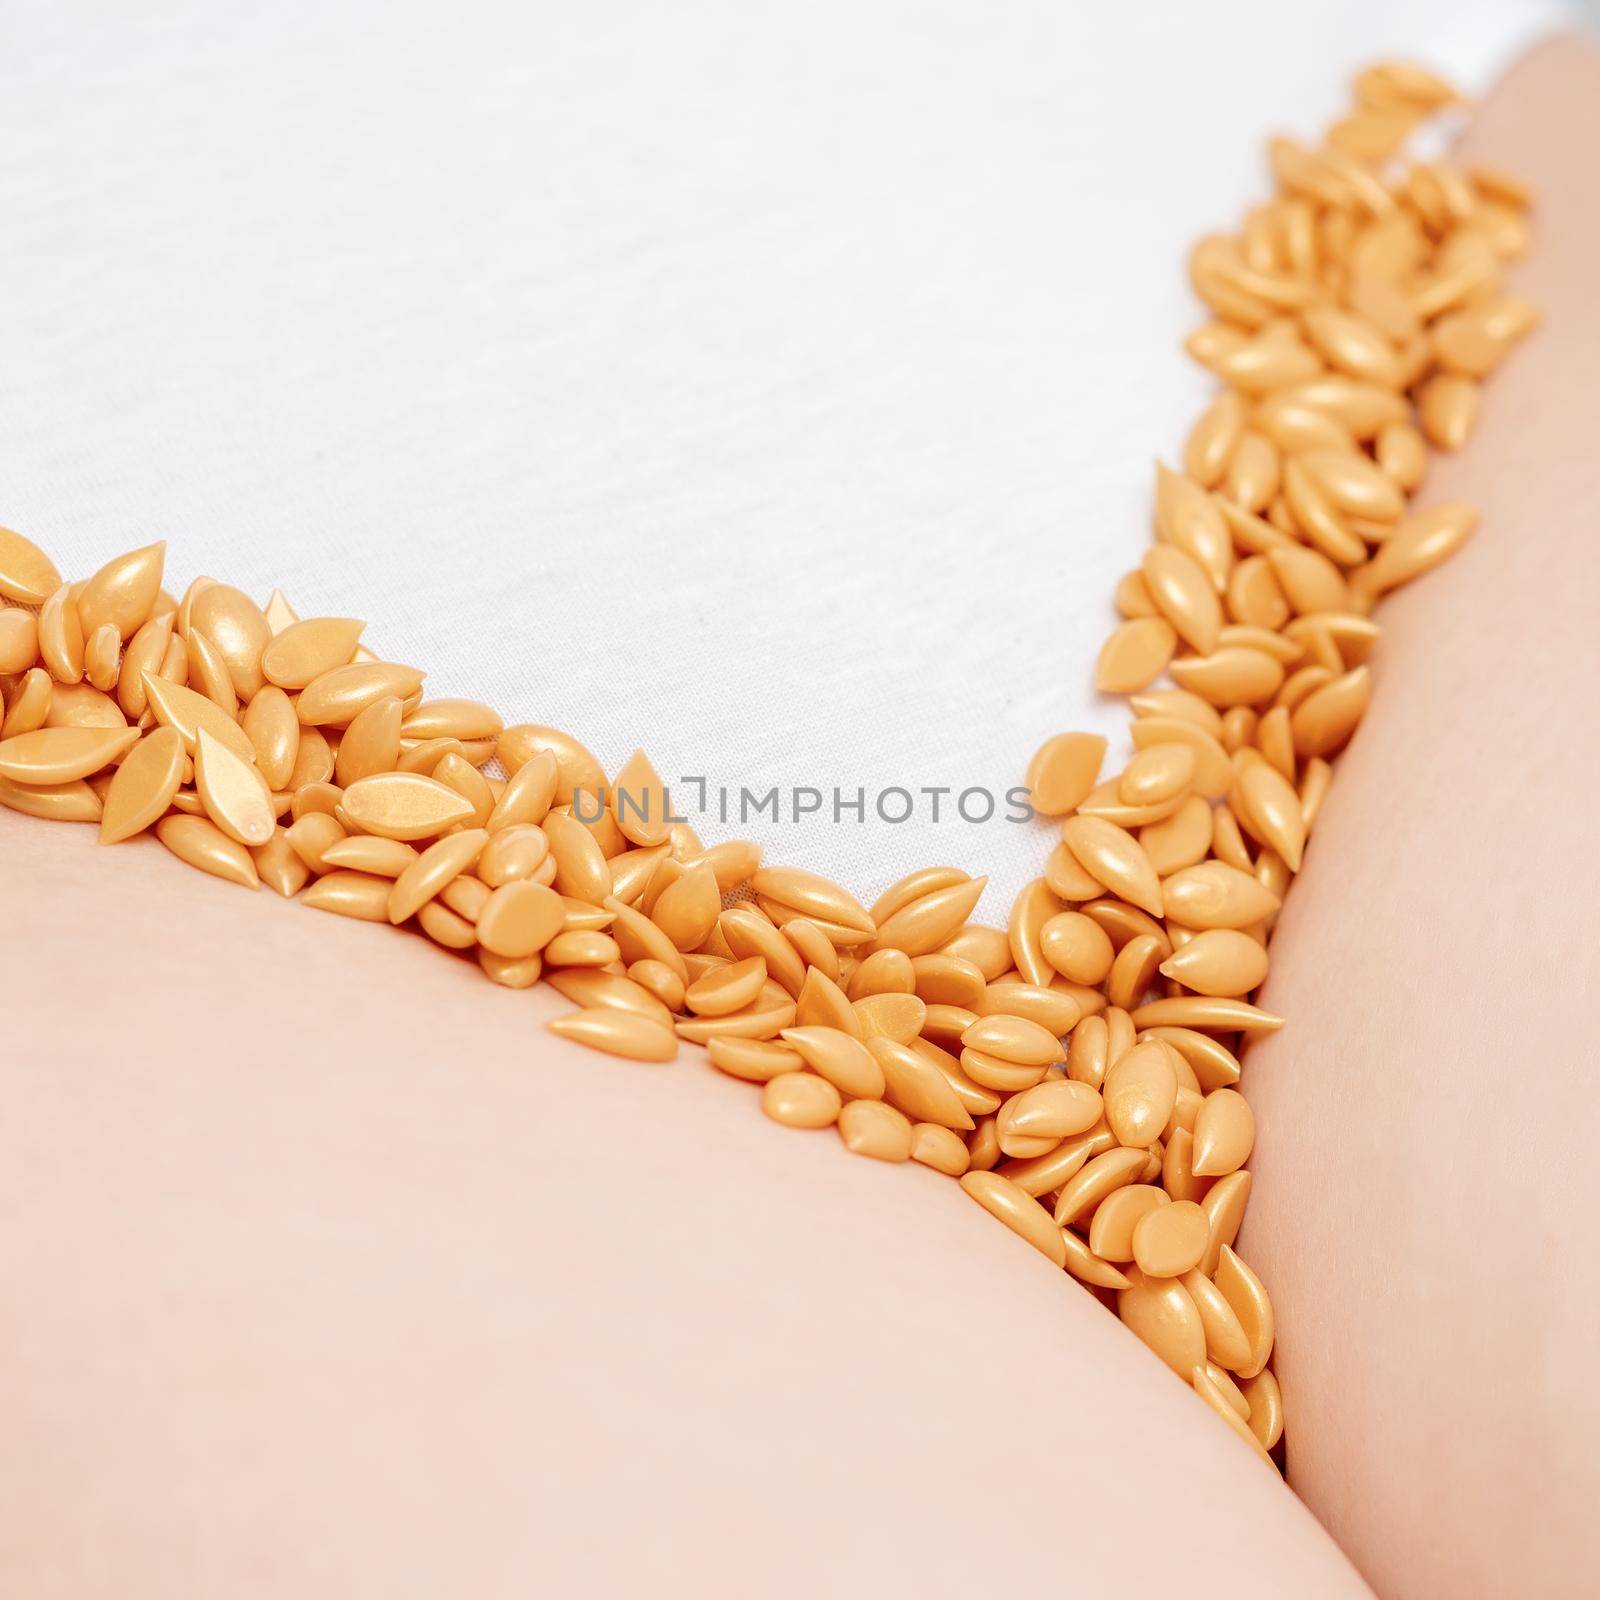 Close up of wax beans or seeds lying in row on bikini zone of young woman